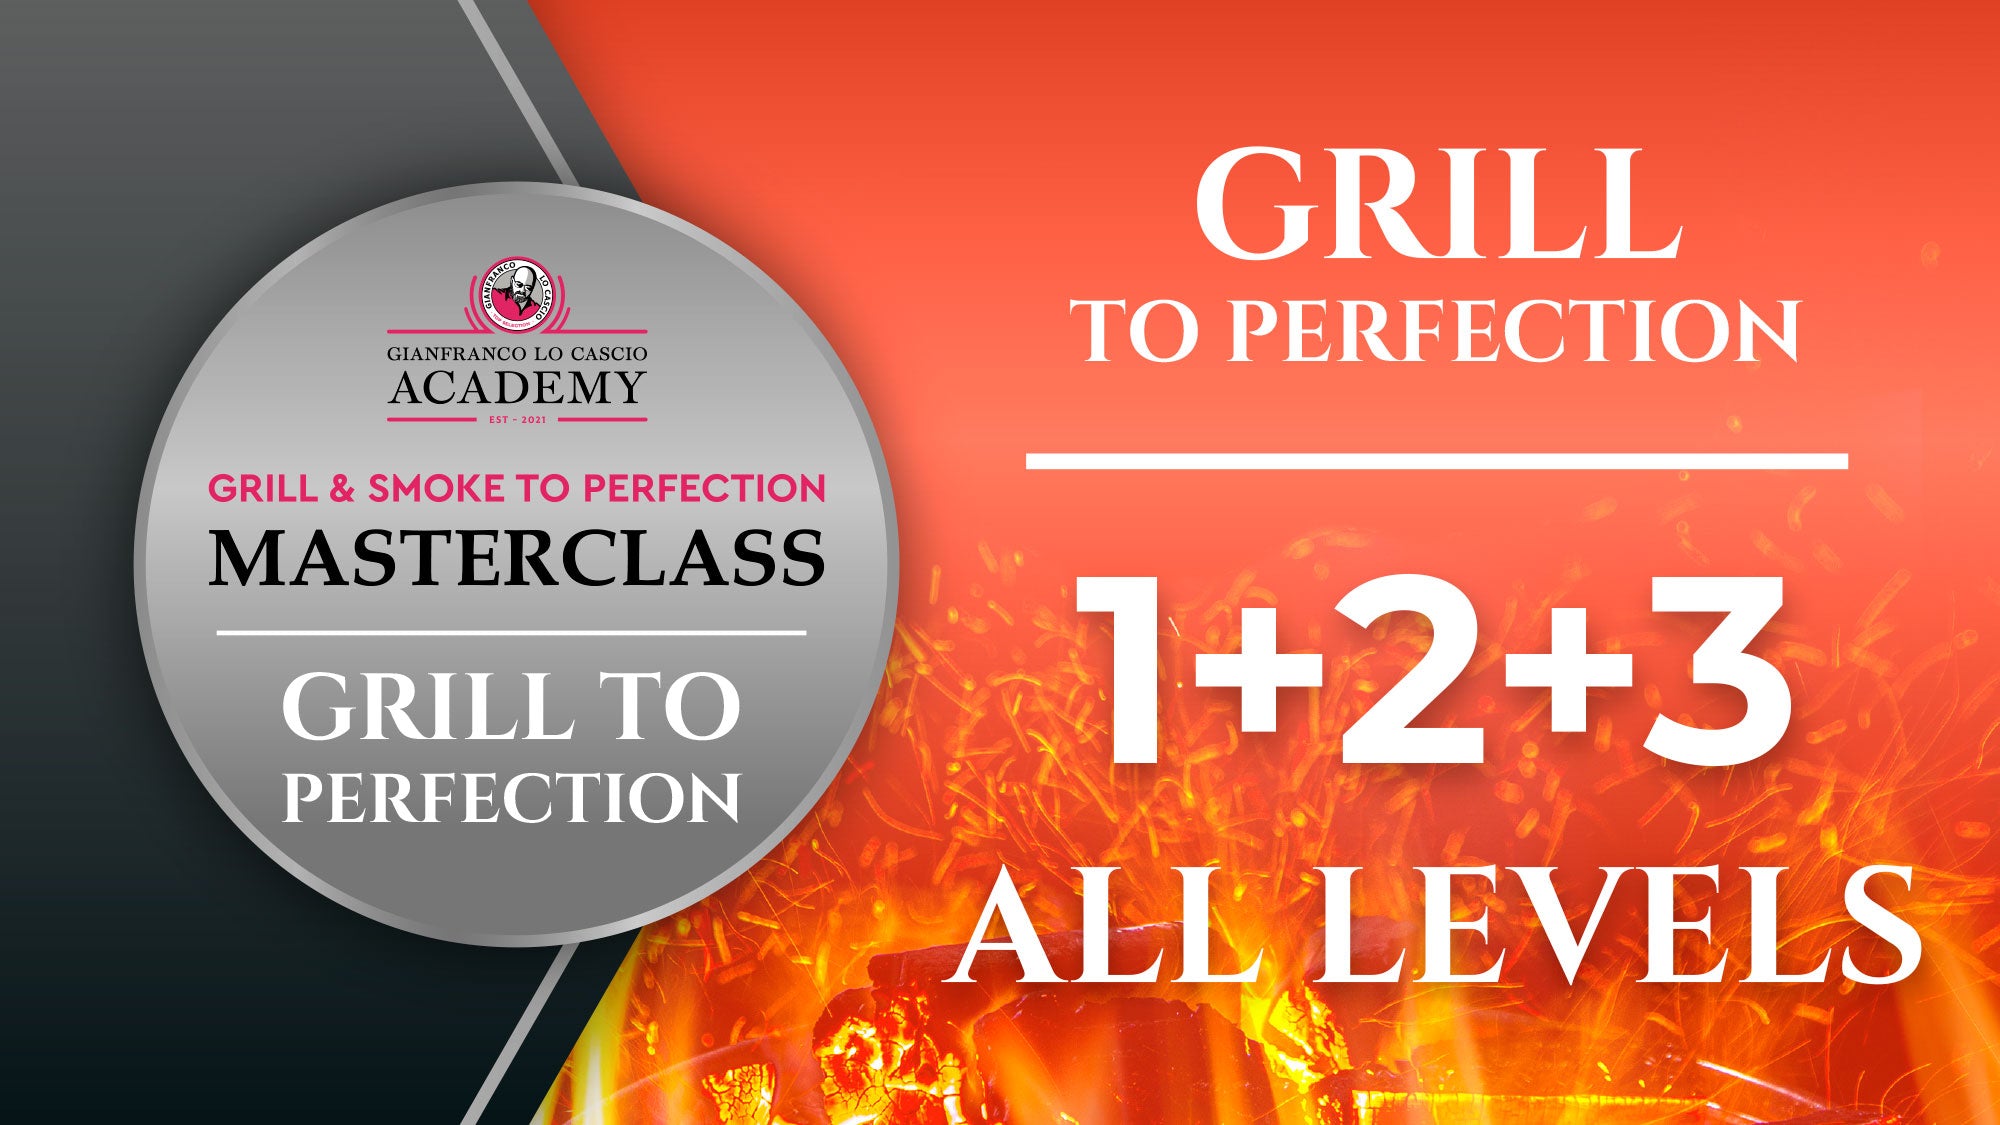 Grill to Perfection - All Levels - Video Masterclass GLC Academy